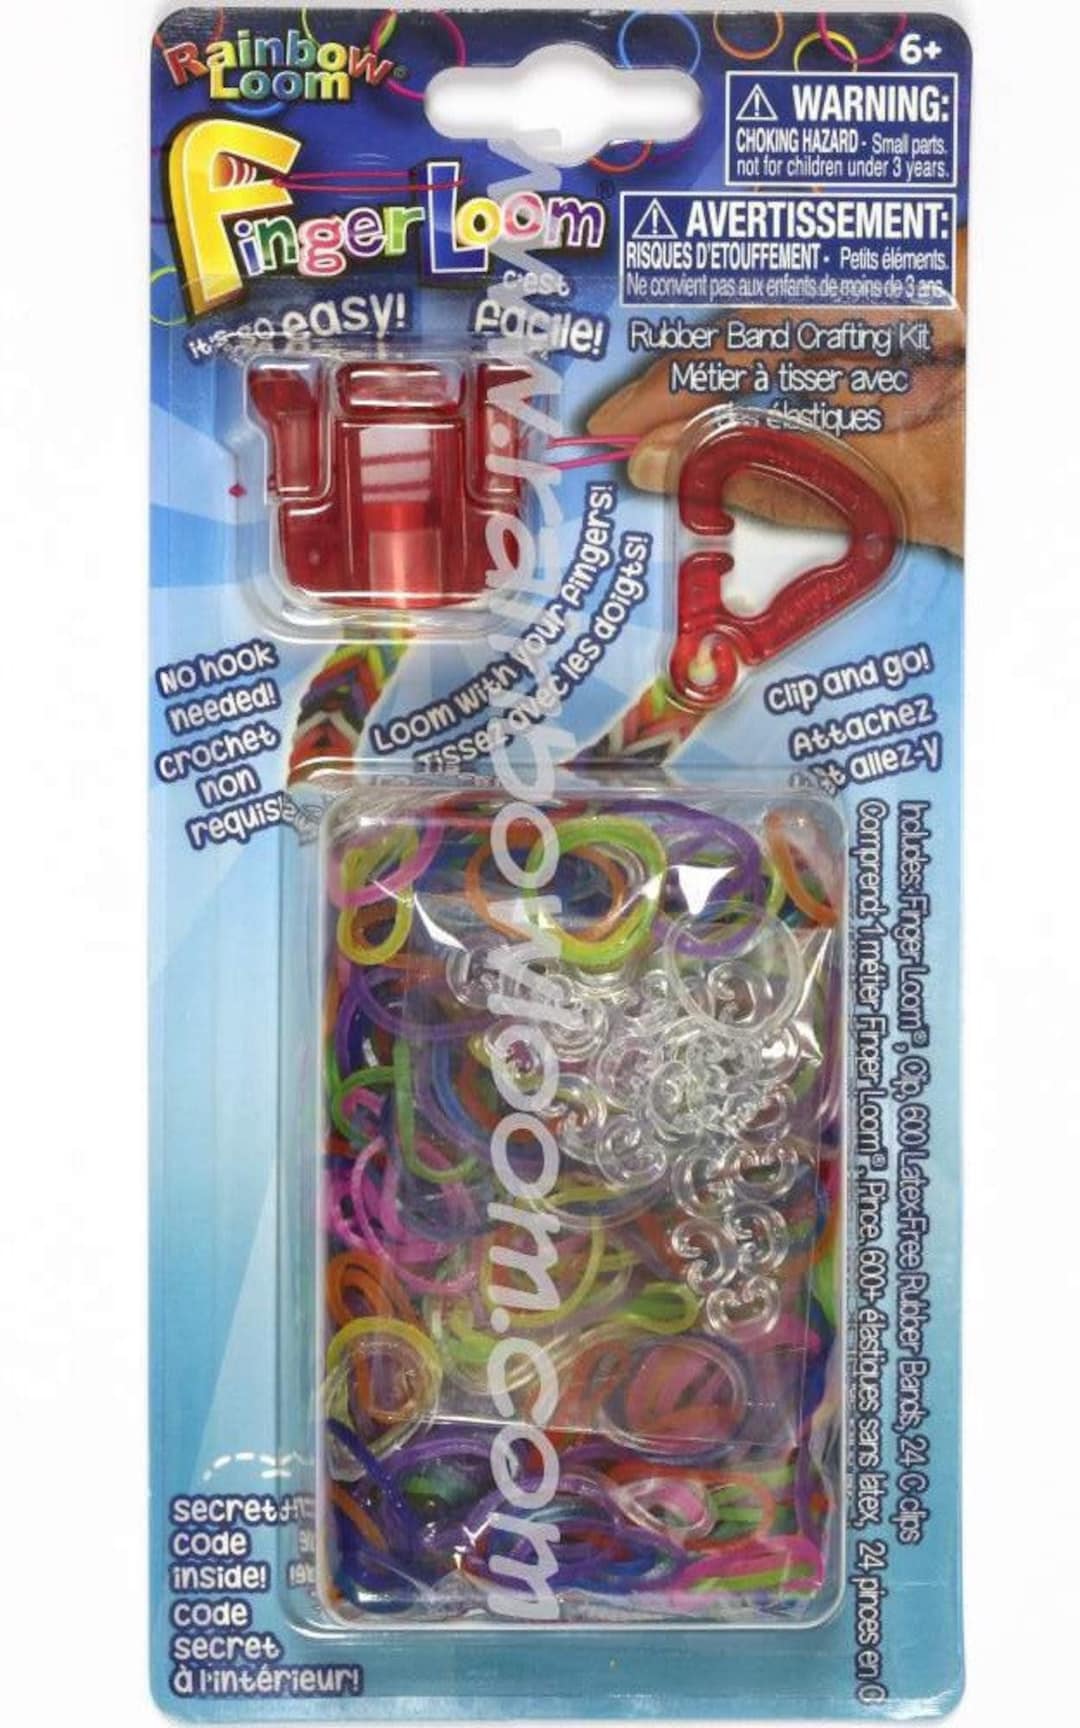 Guaranteed Authentic Rainbow Loom Finger Loom Kit 600 Bands and 24 C-clips  